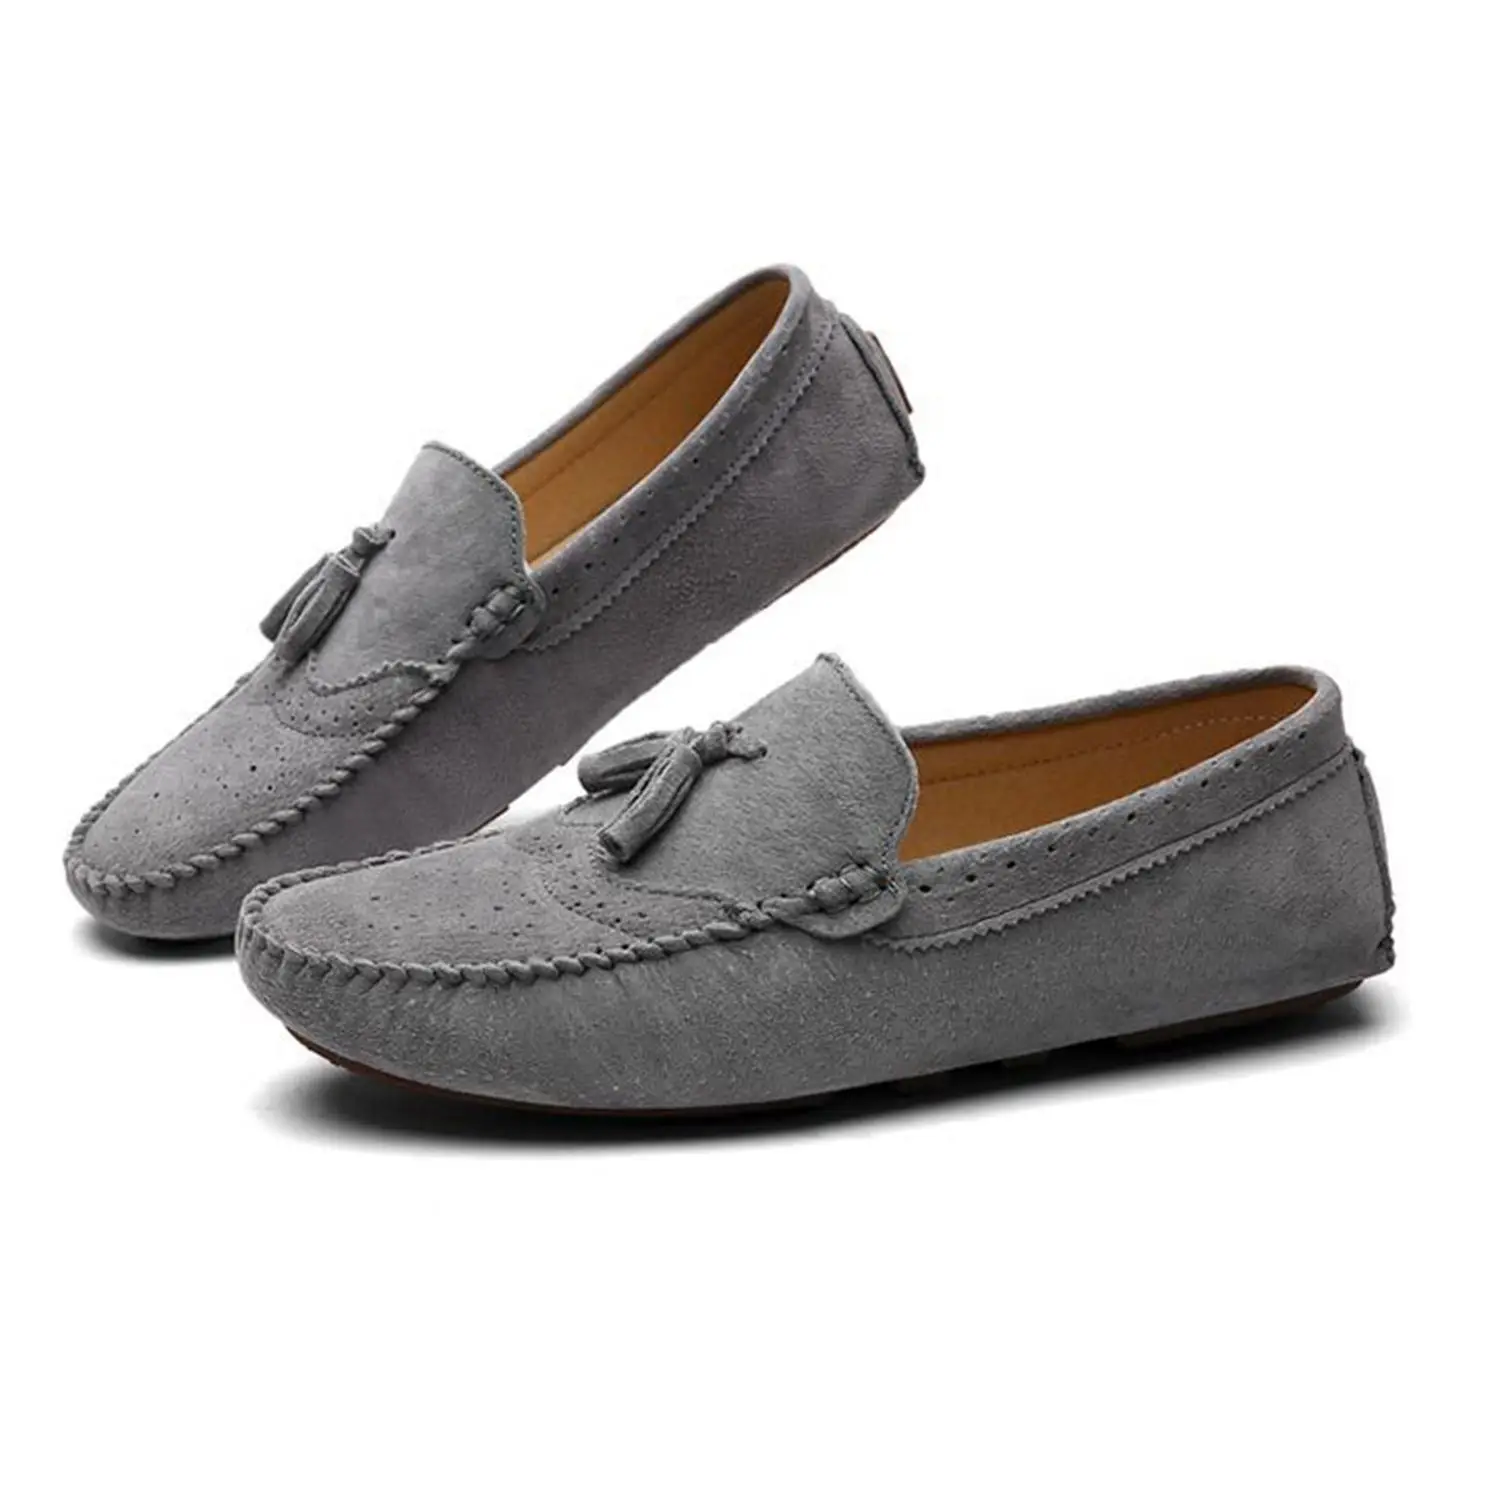 Aliexpress.com : Buy Casual Driving Shoes Genuine Leather Loafers ...